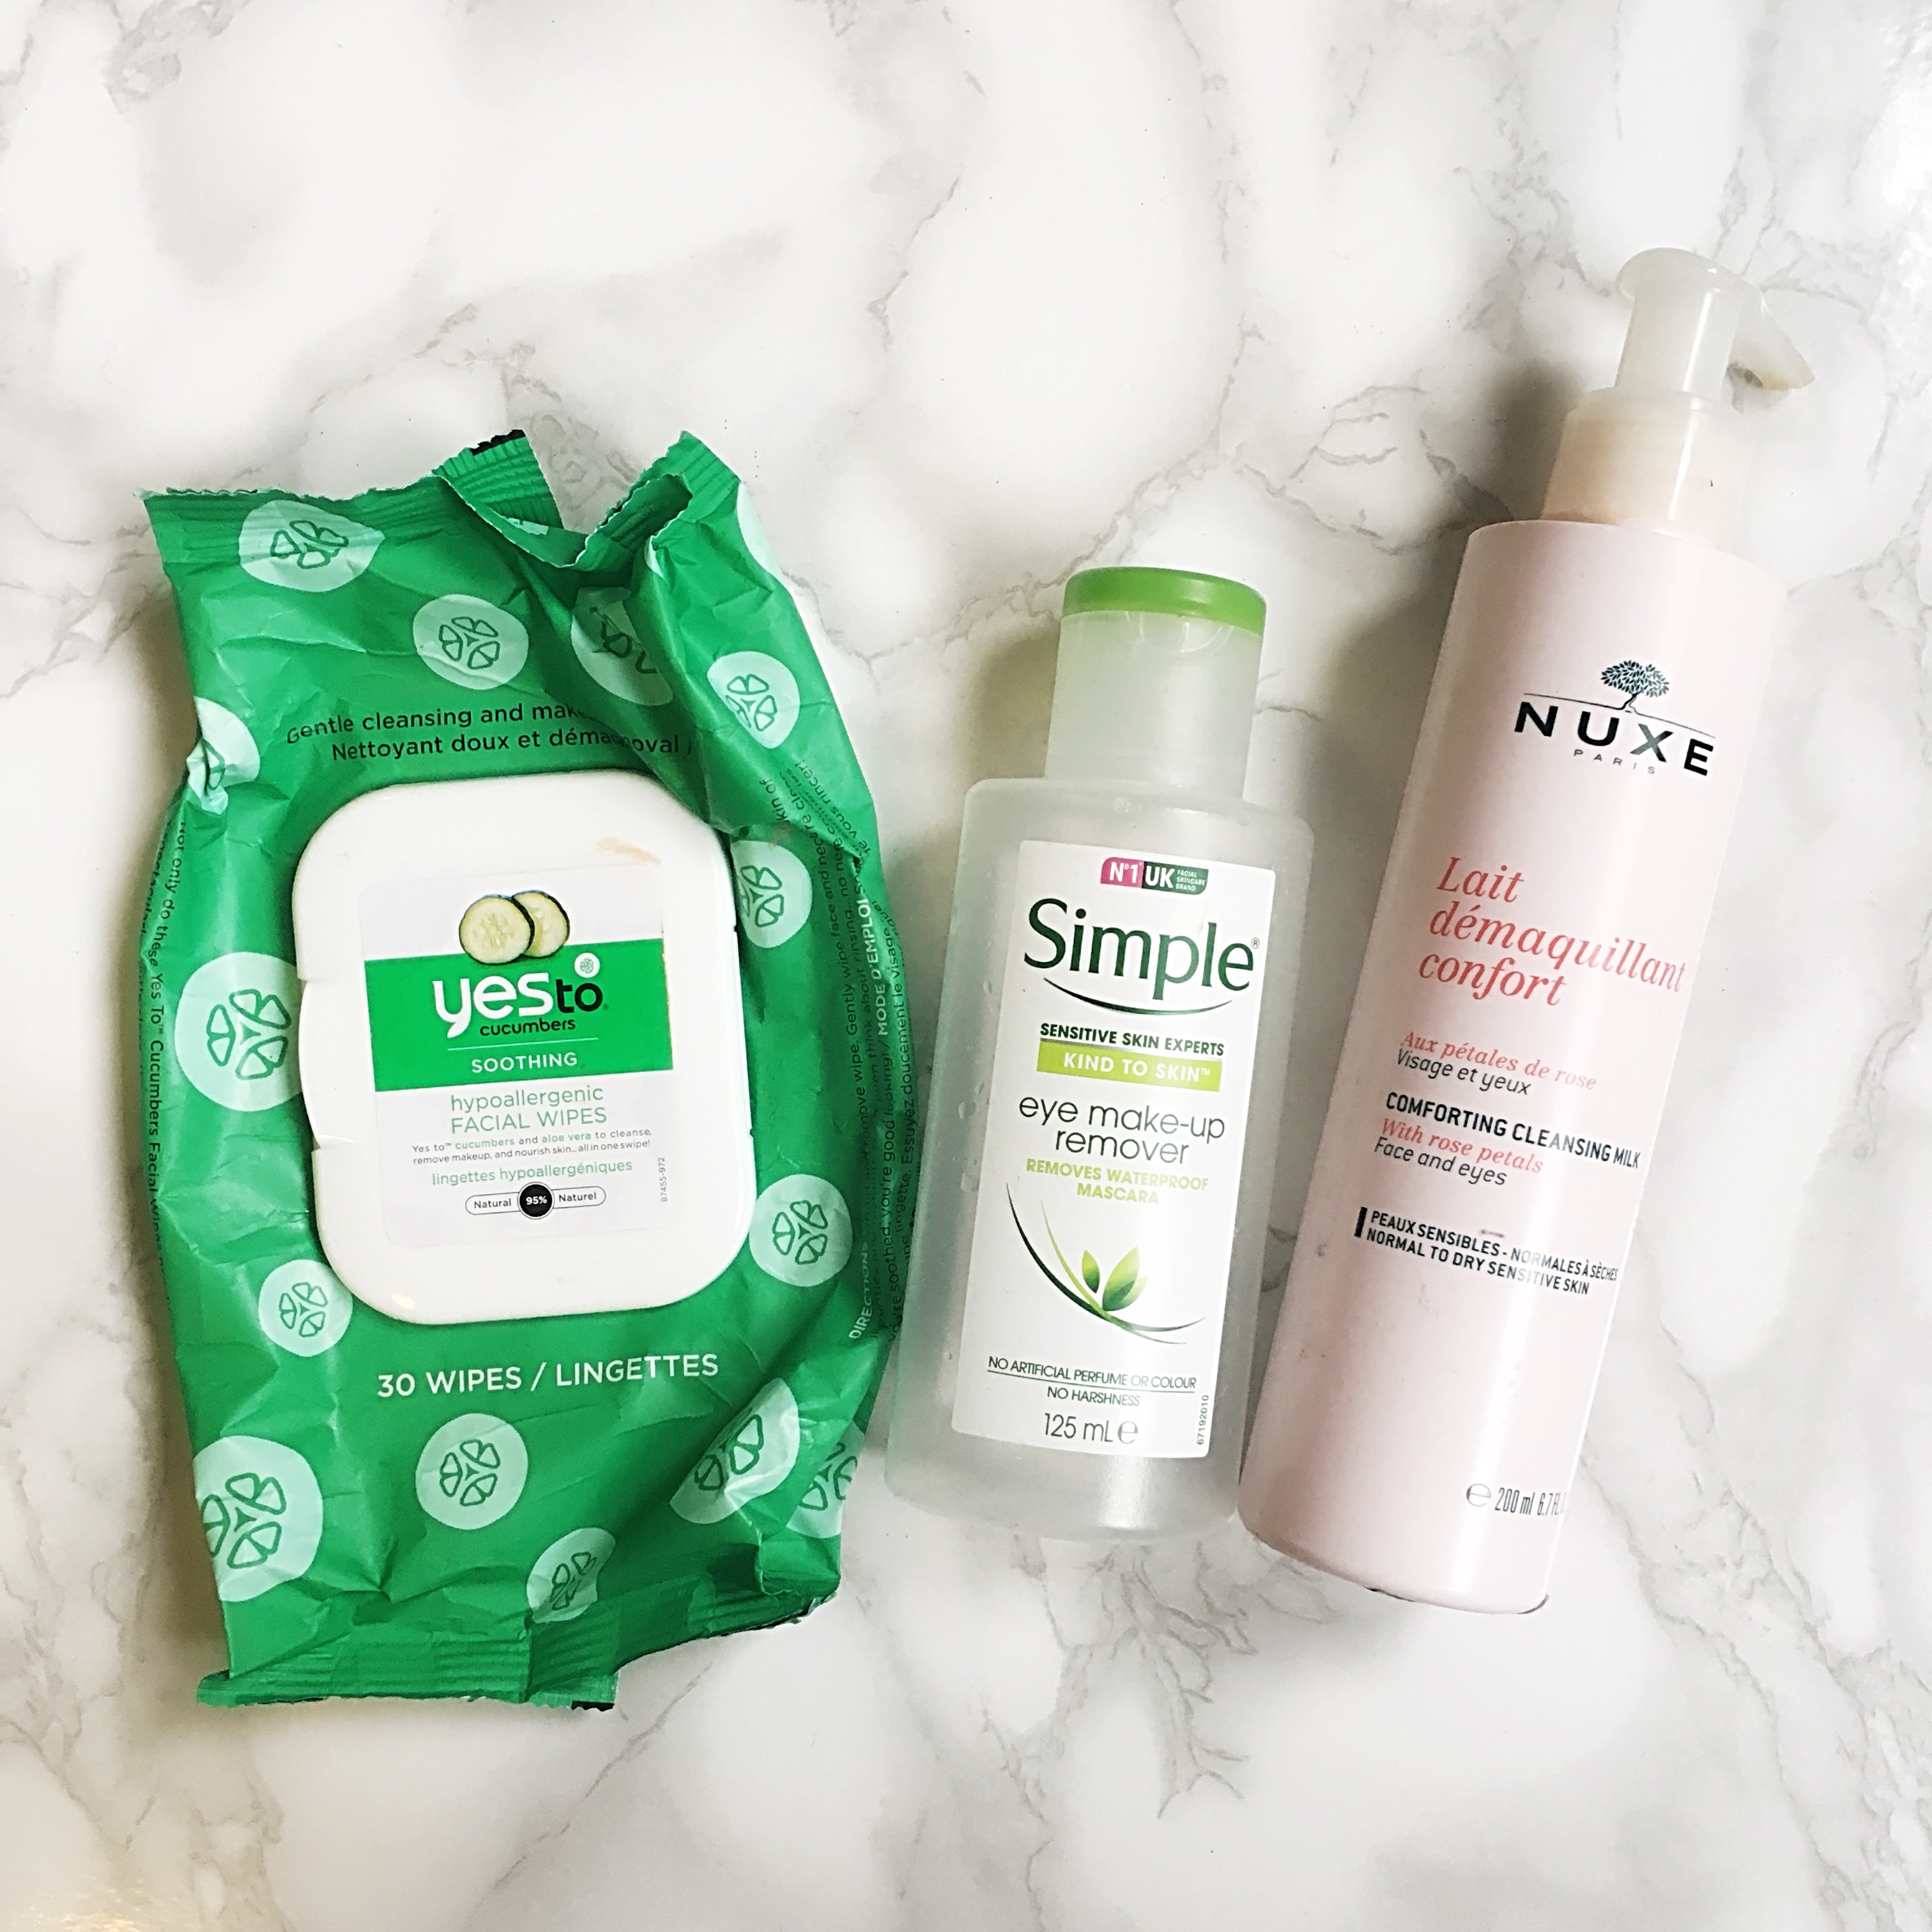 Empties Cleansing products